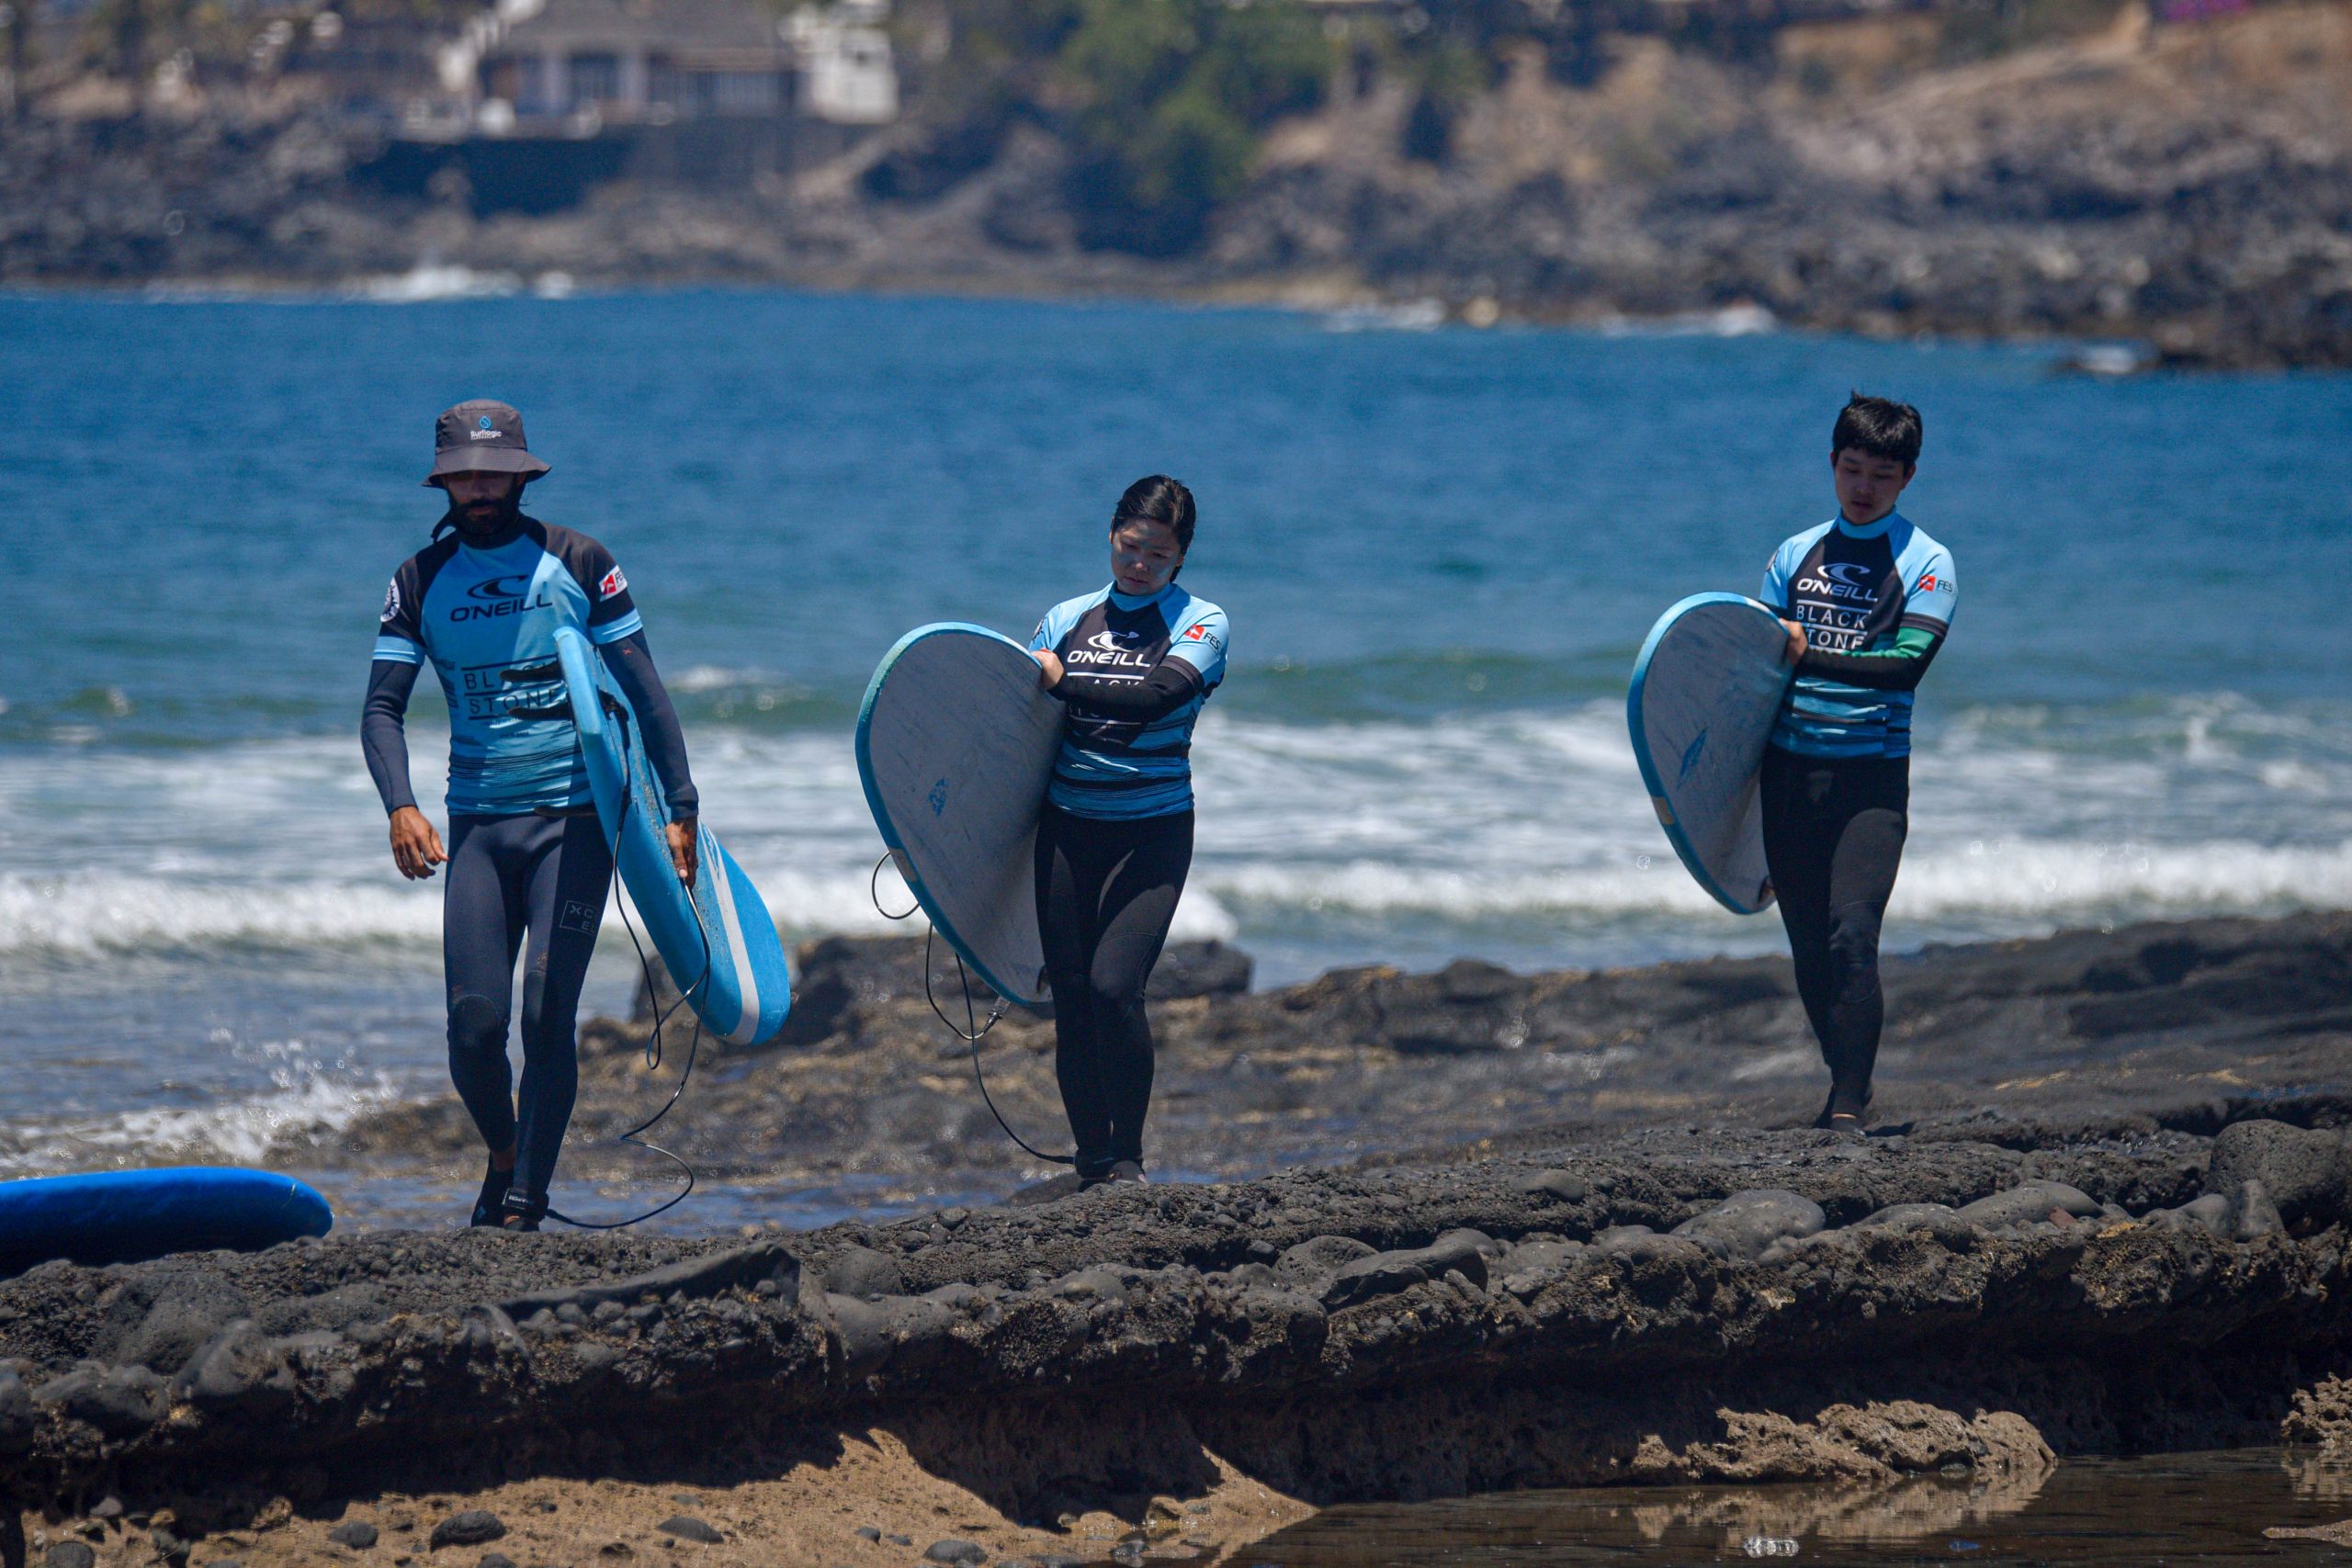 Blackstone Surf Center instructor giving a surf lesson in Playa las Américas in Tenerife to a group of people